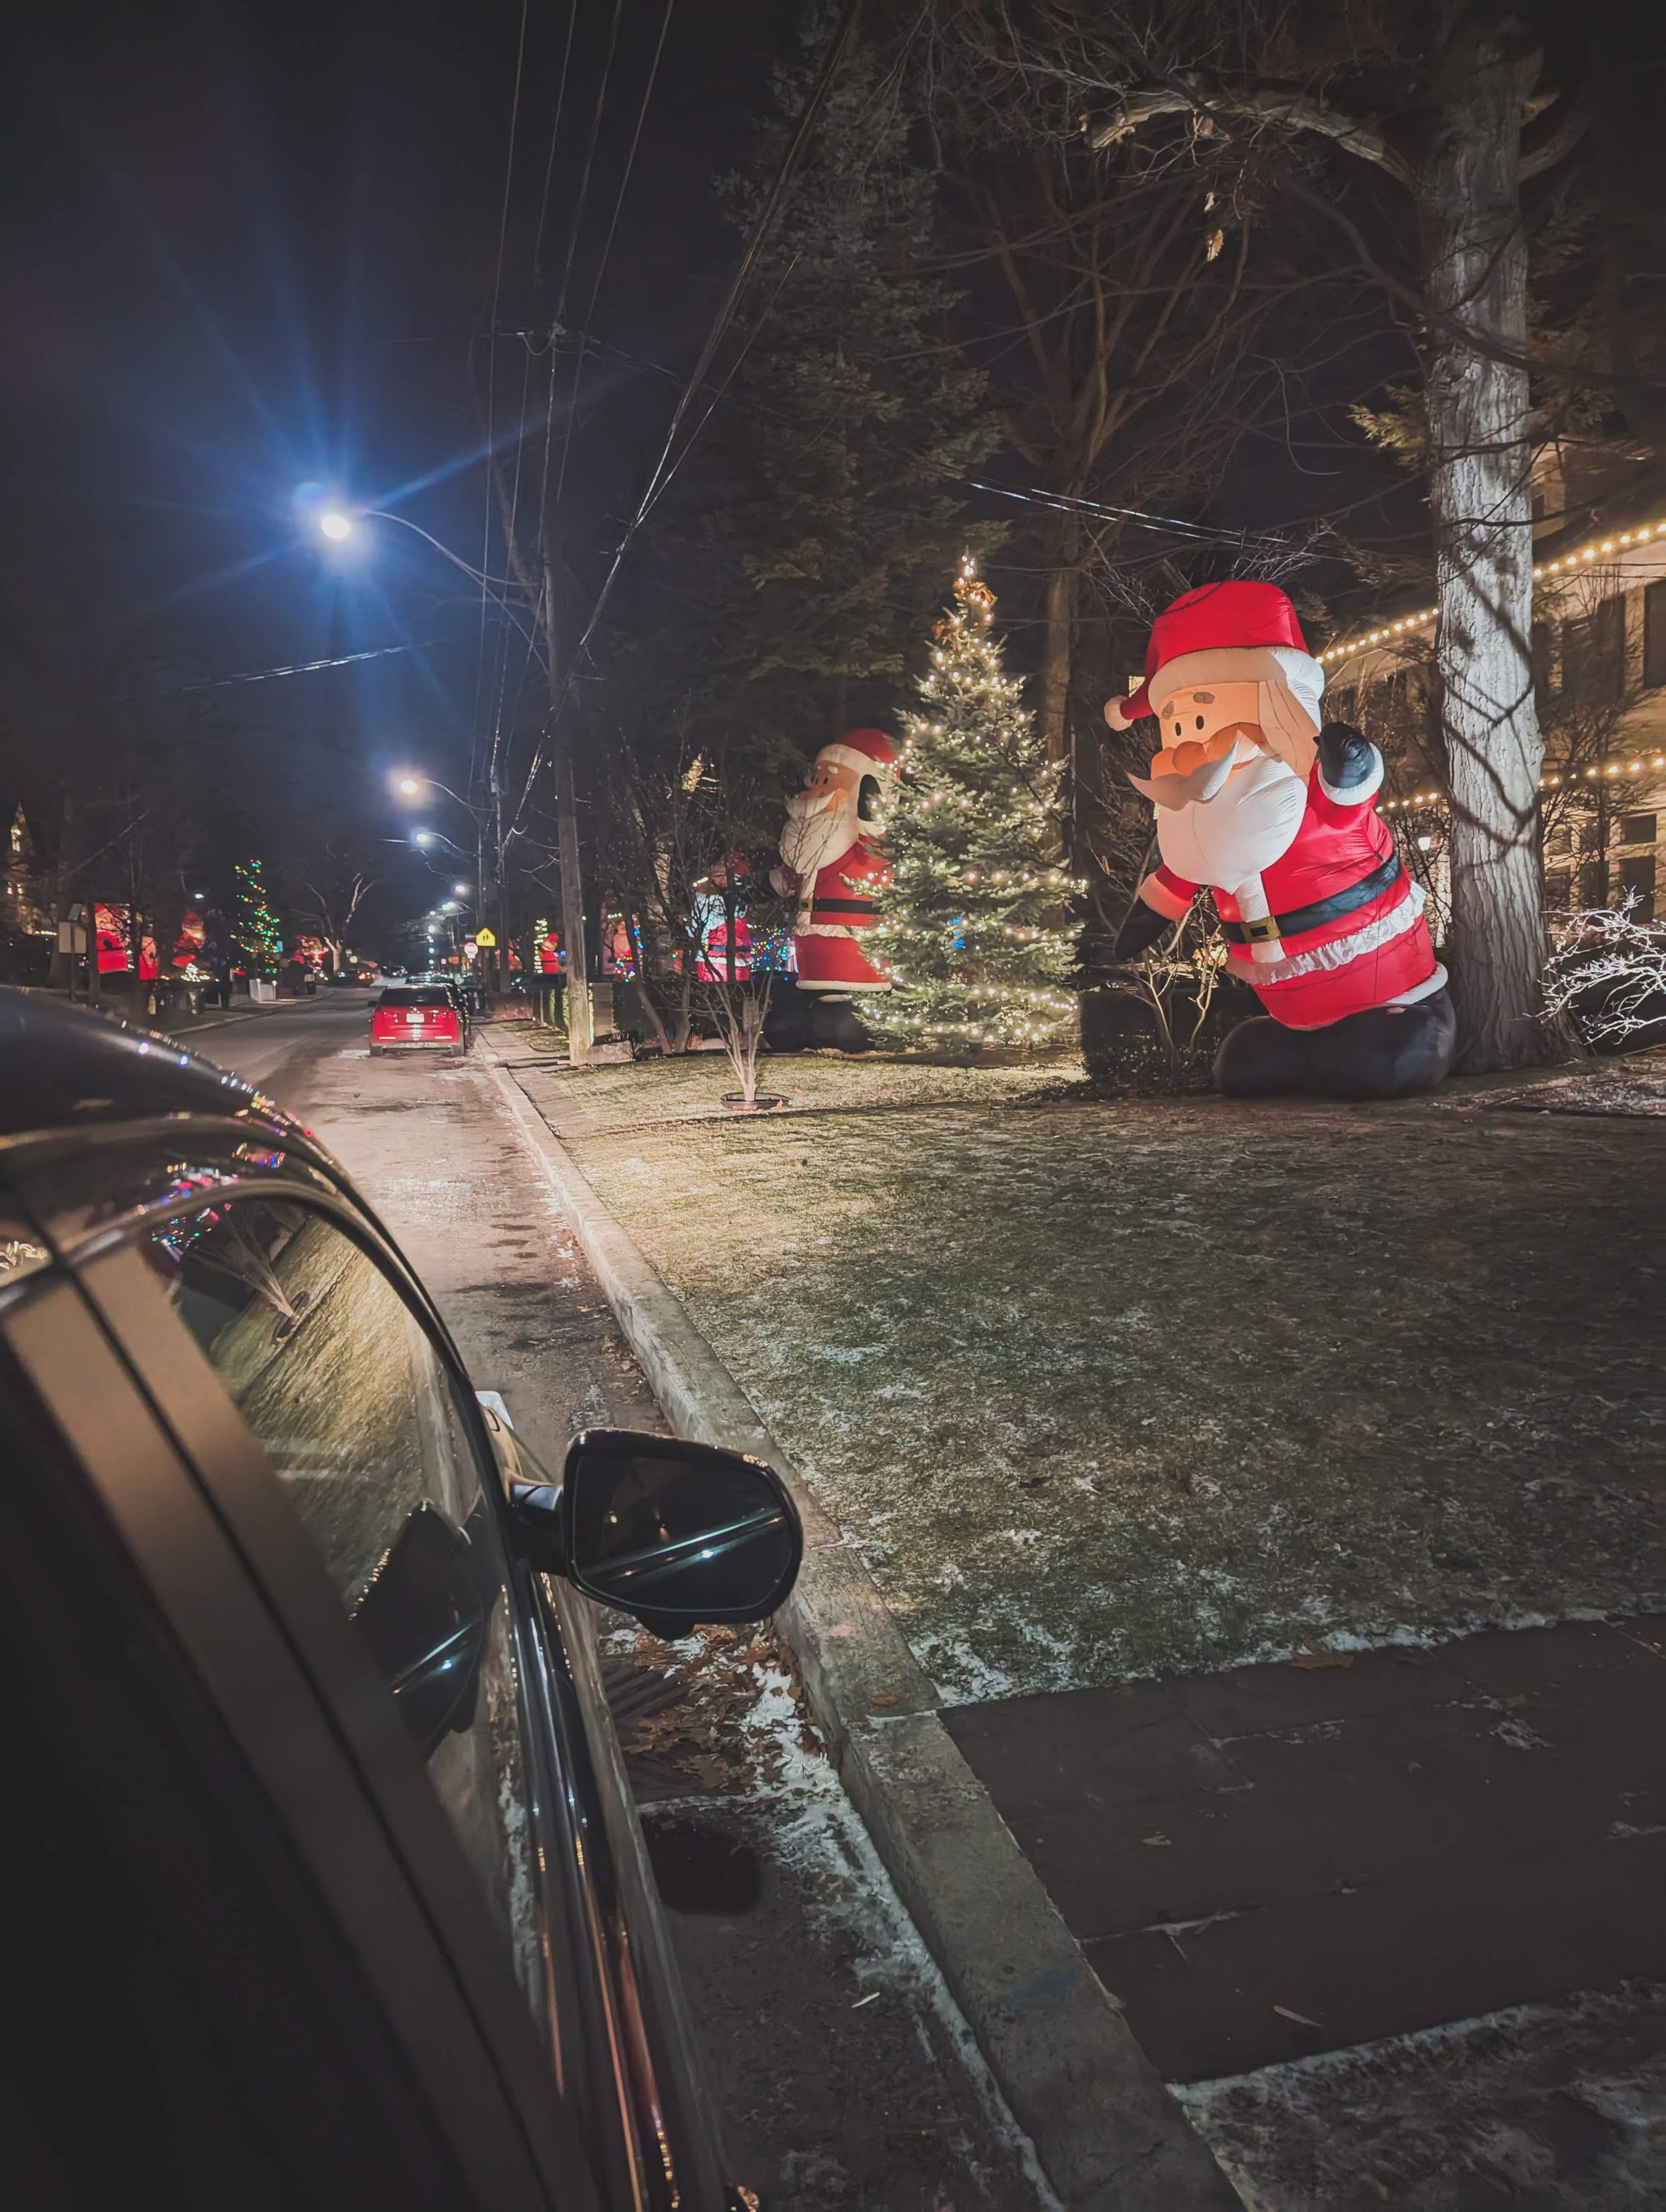  Mom and Dad took me on a little drive to Kringlewood - a street full of giant Santas! 